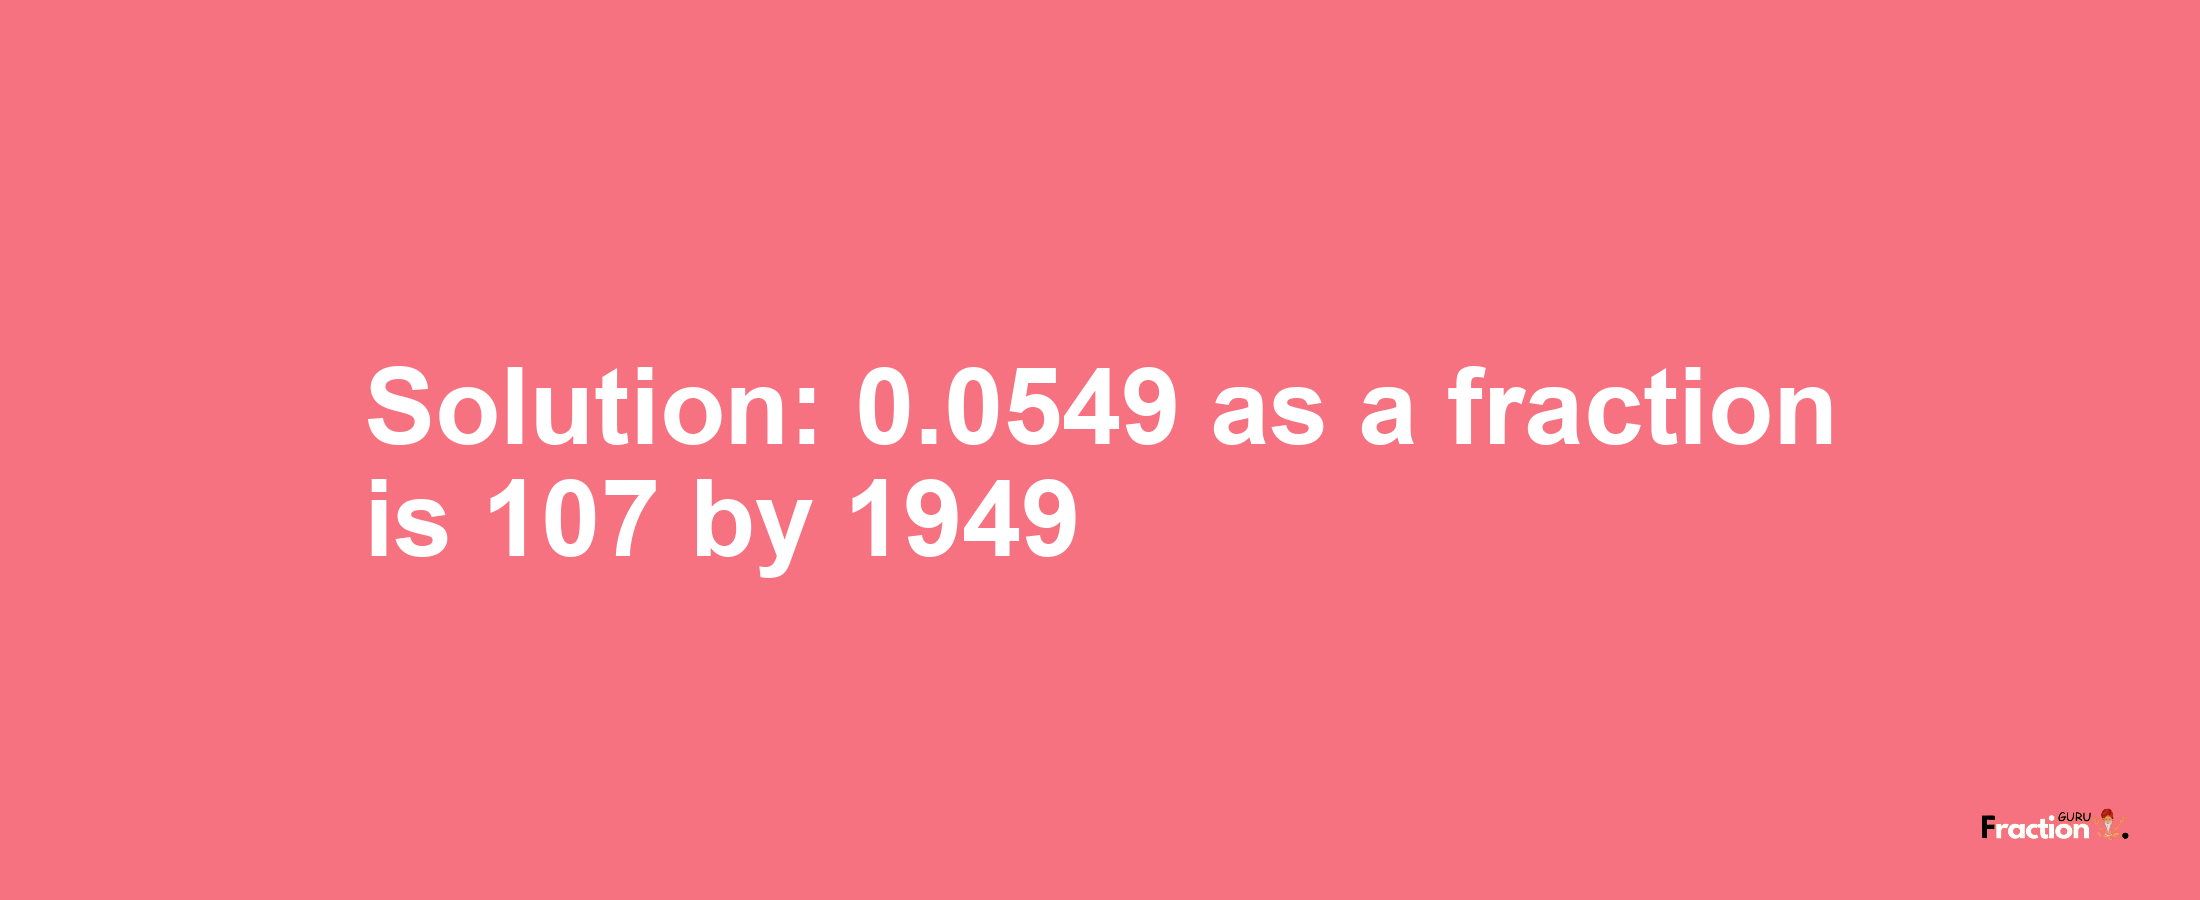 Solution:0.0549 as a fraction is 107/1949